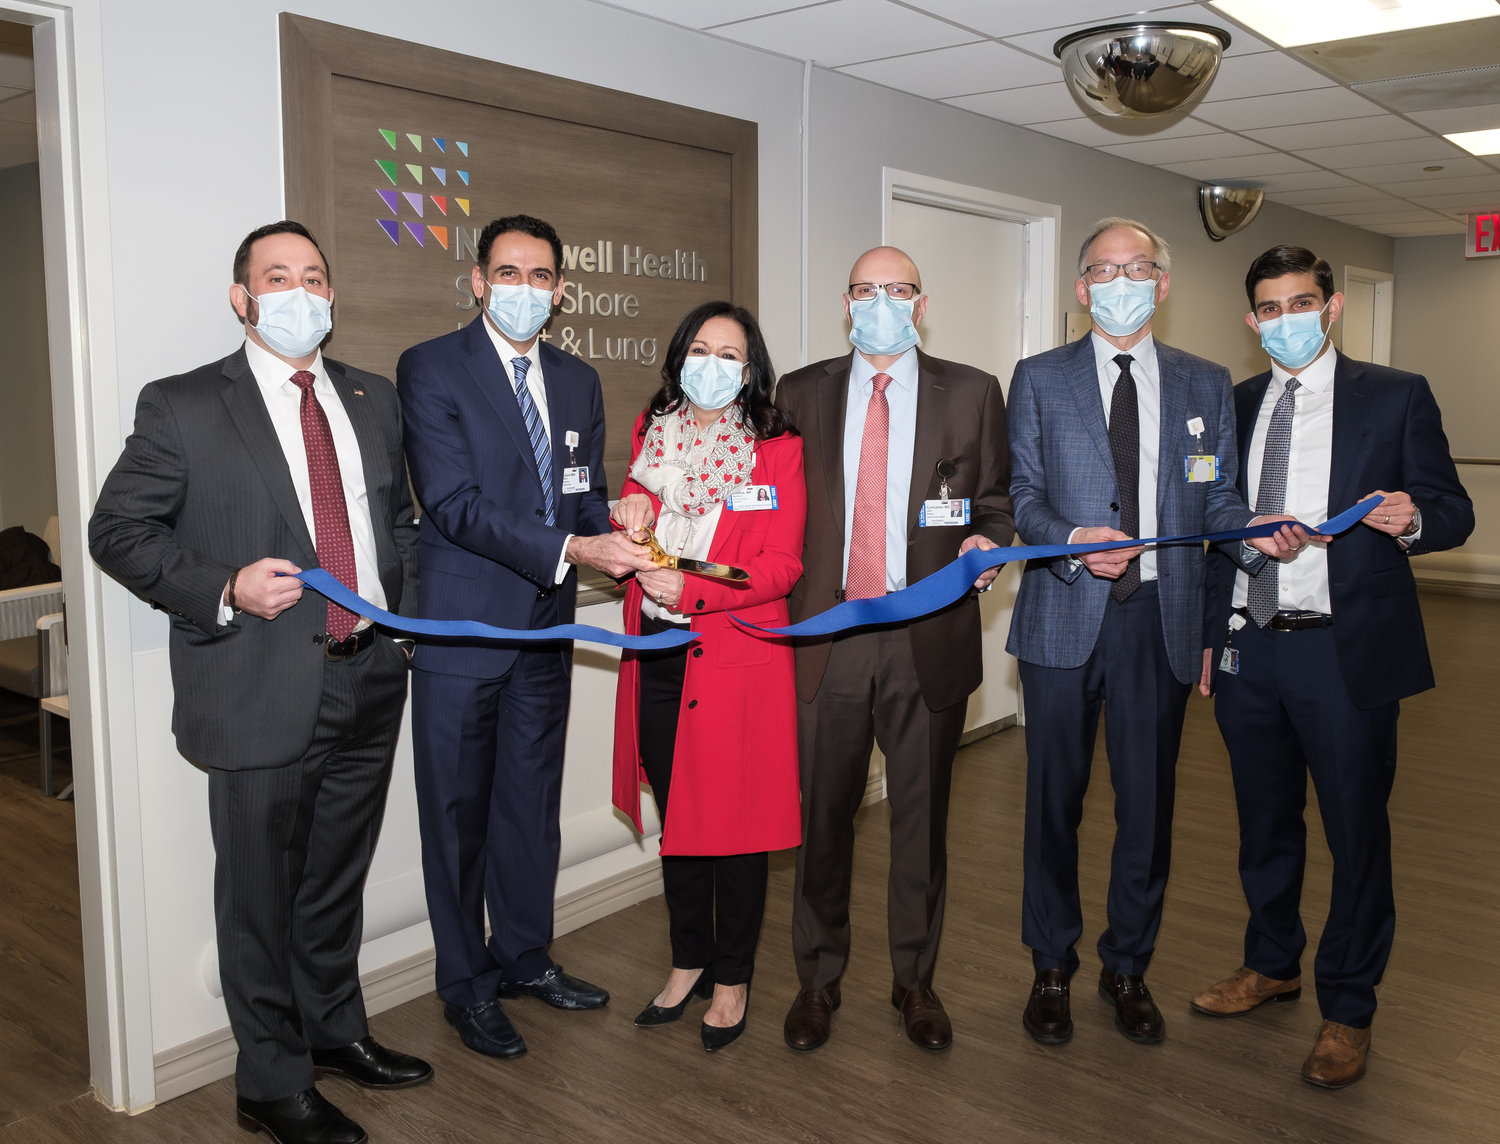 Last week, South Shore University Hospital announced the opening of the new 2,000-square-
foot cardiac ambulatory suite, which will offer cardiac and thoracic care.